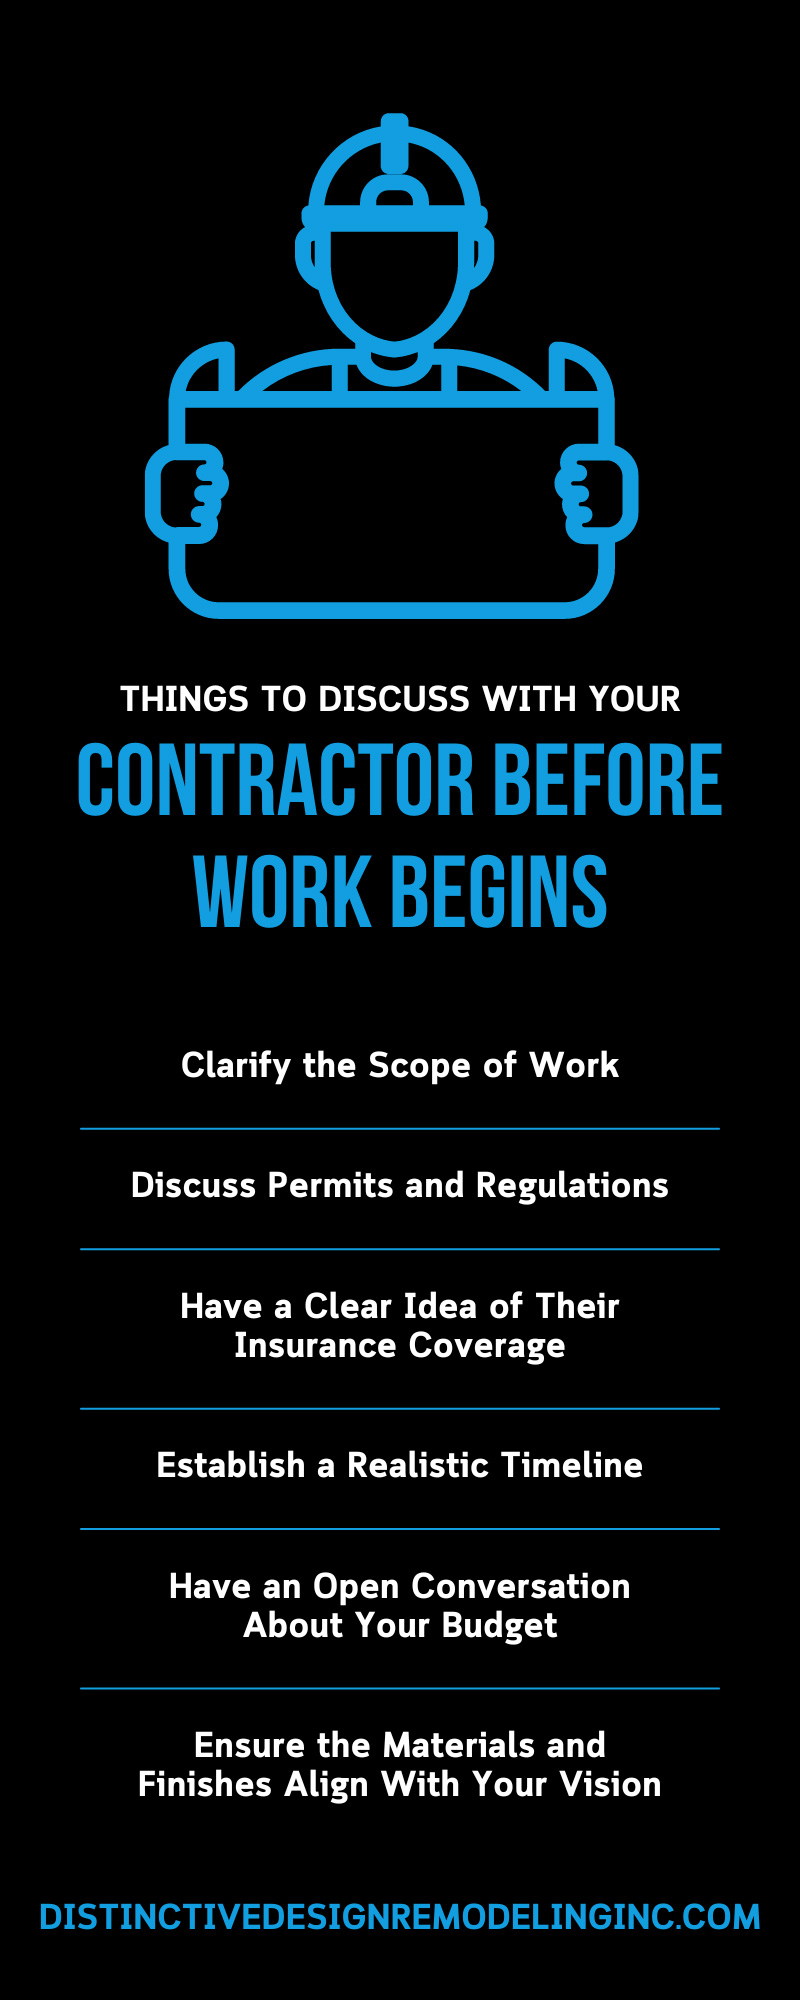 8 Things To Discuss With Your Contractor Before Work Begins